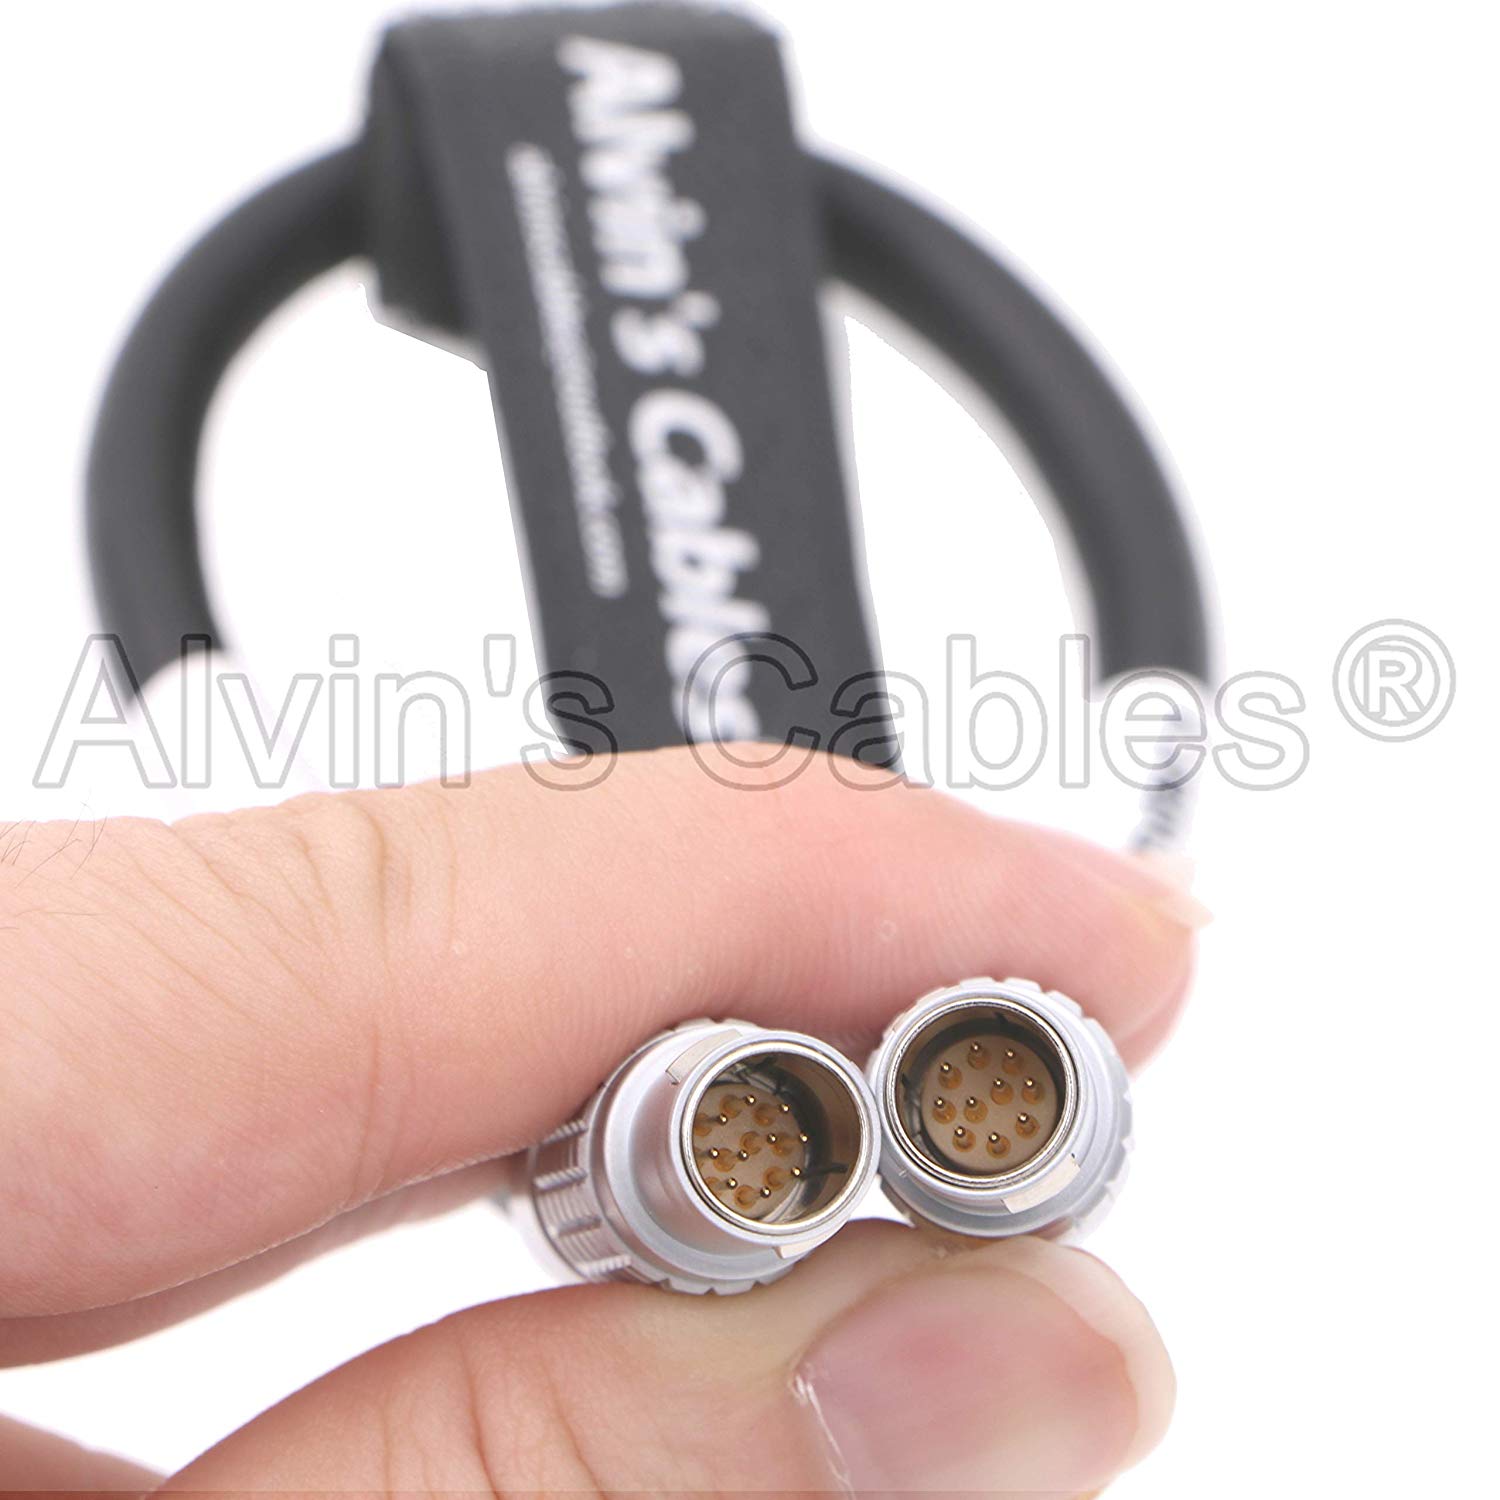 Alvin's Cables Z CAM E2 Sync Cable for Dual Camera 10 Pin Male to 10 Pin Male Cord K2 Pro Prototype